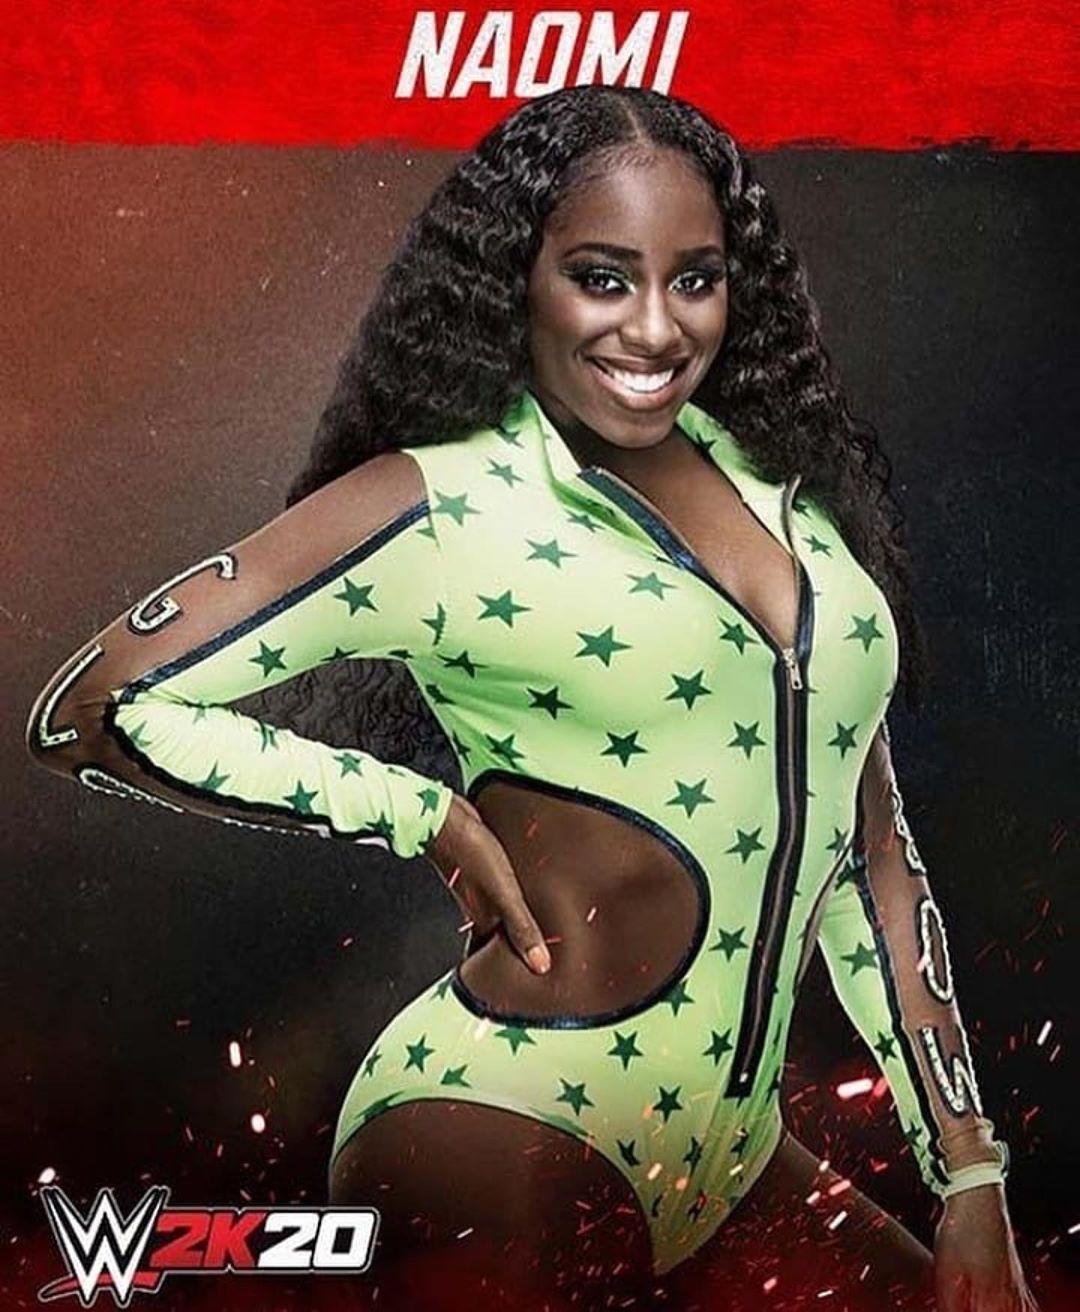 70+ Hot Pictures Of Naomi a.k.a Trinity Fatu from WWE Will Leave You Gasping For Her 600